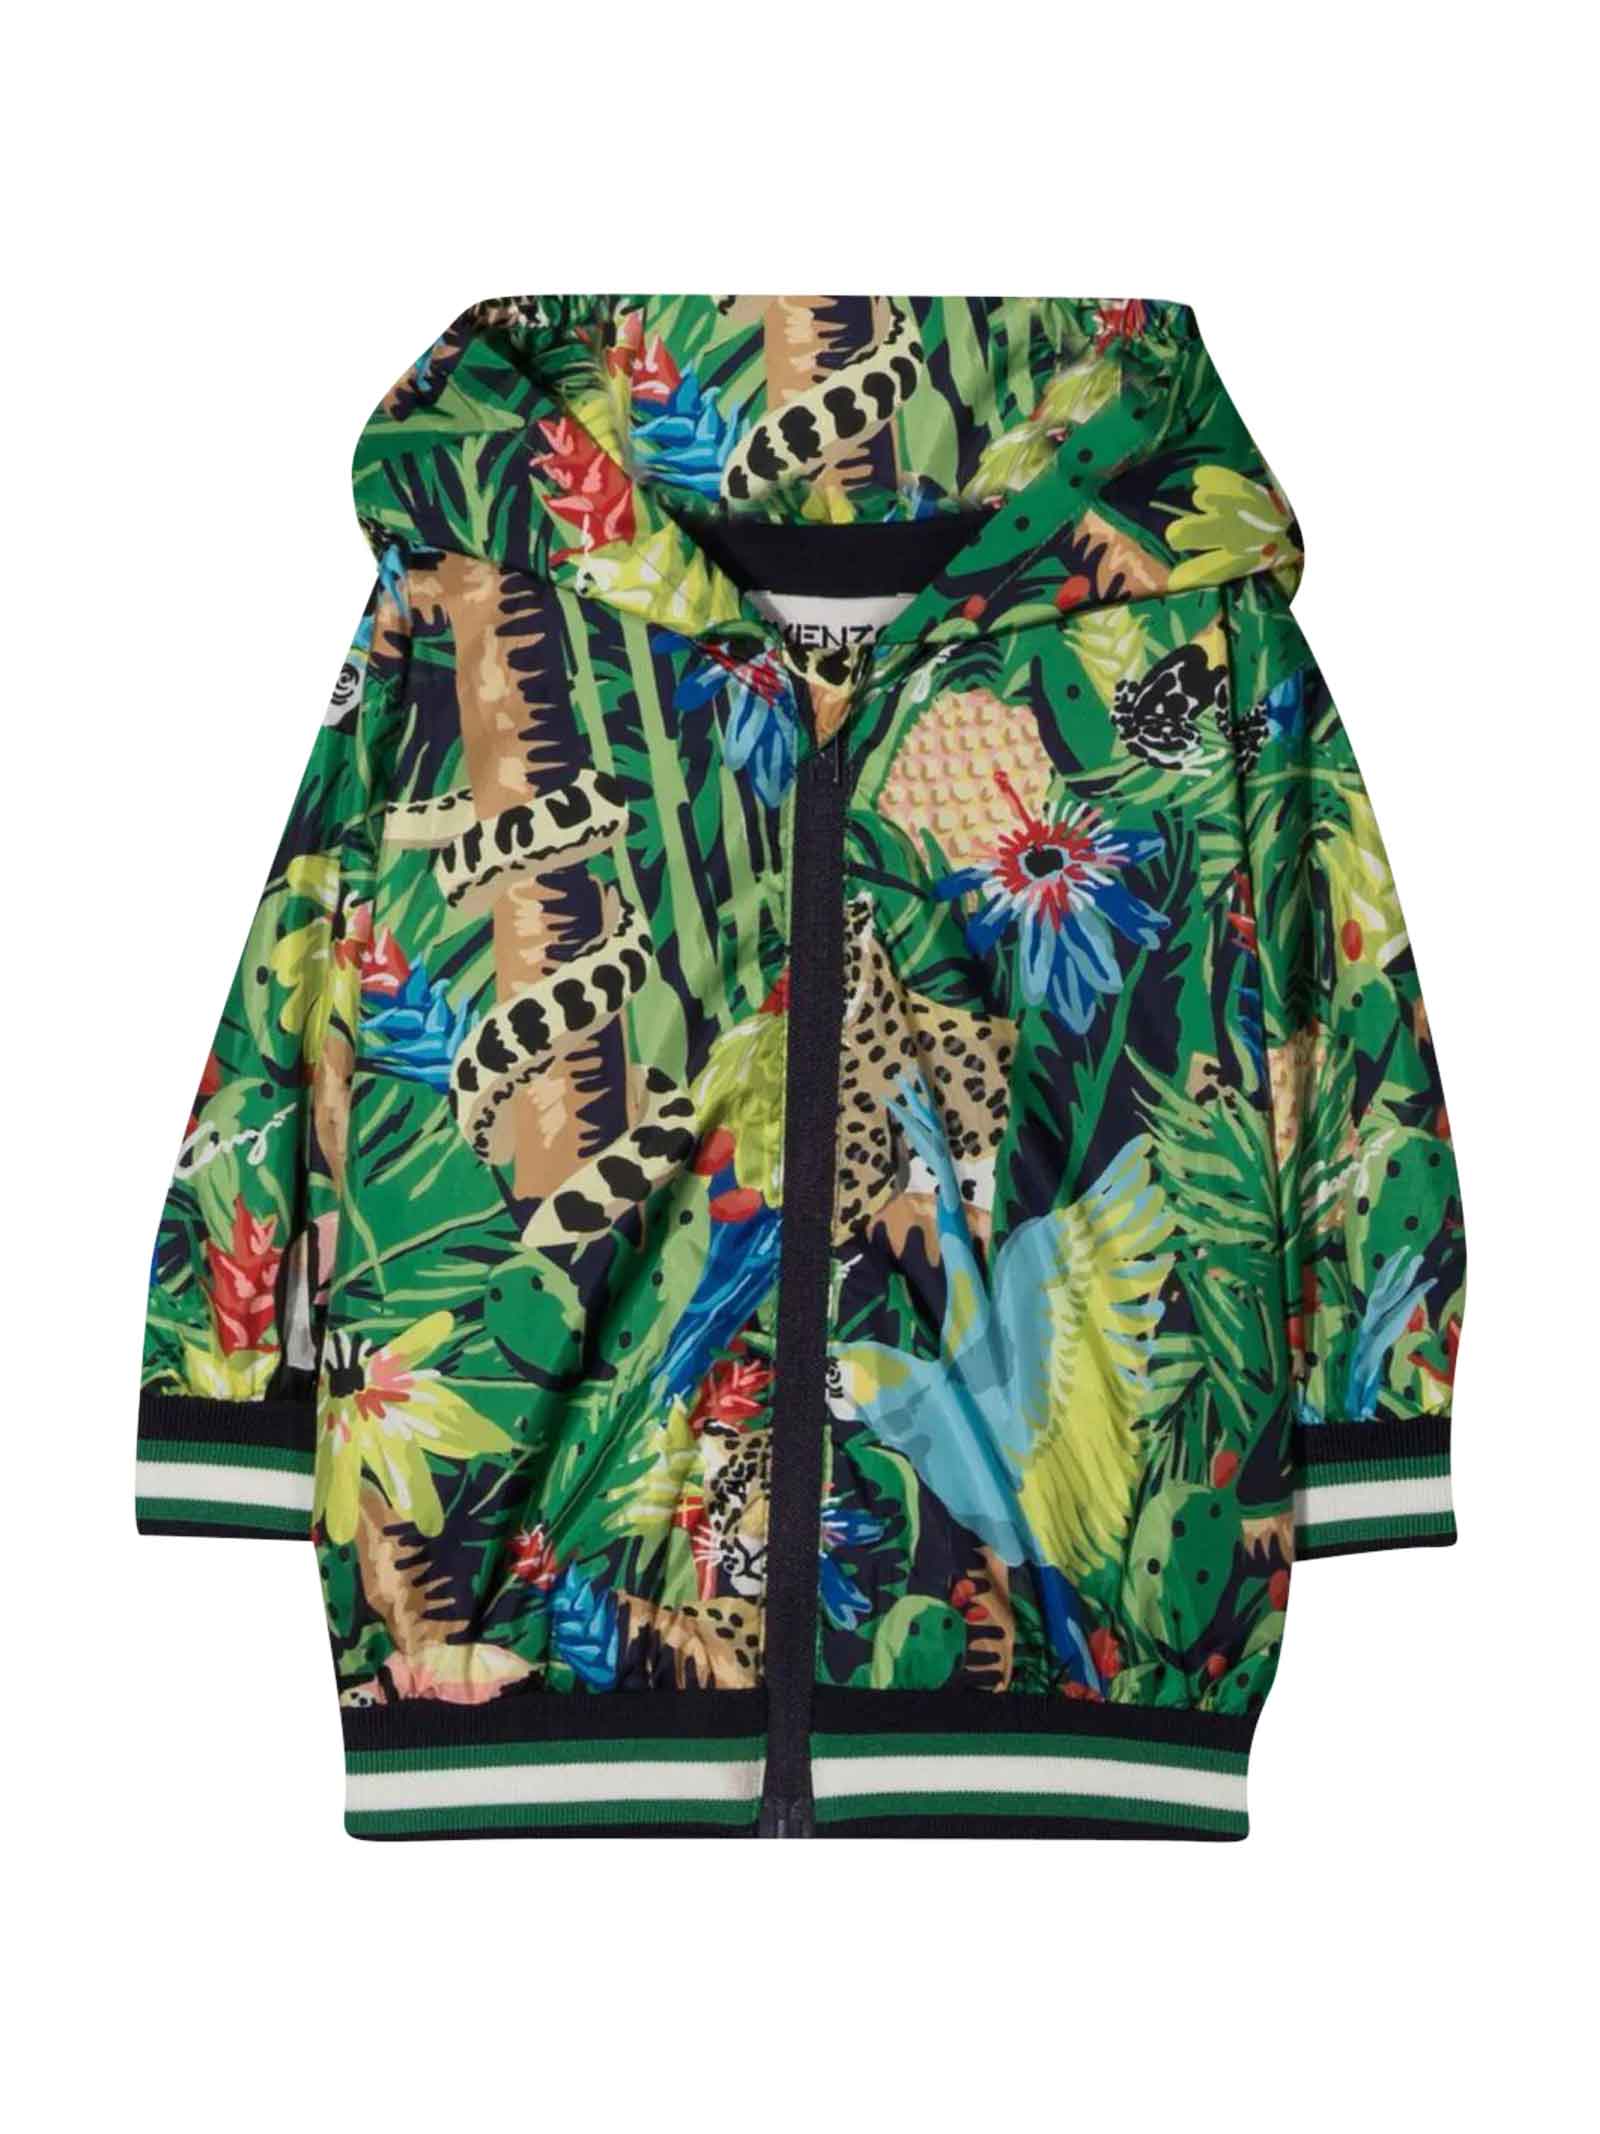 KENZO MULTICOLOR NEWBORN WINDBREAKER WITH ALL-OVER GRAPHIC PRINT, HOOD, LONG SLEEVES, FRONT ZIP CLOSURE, T